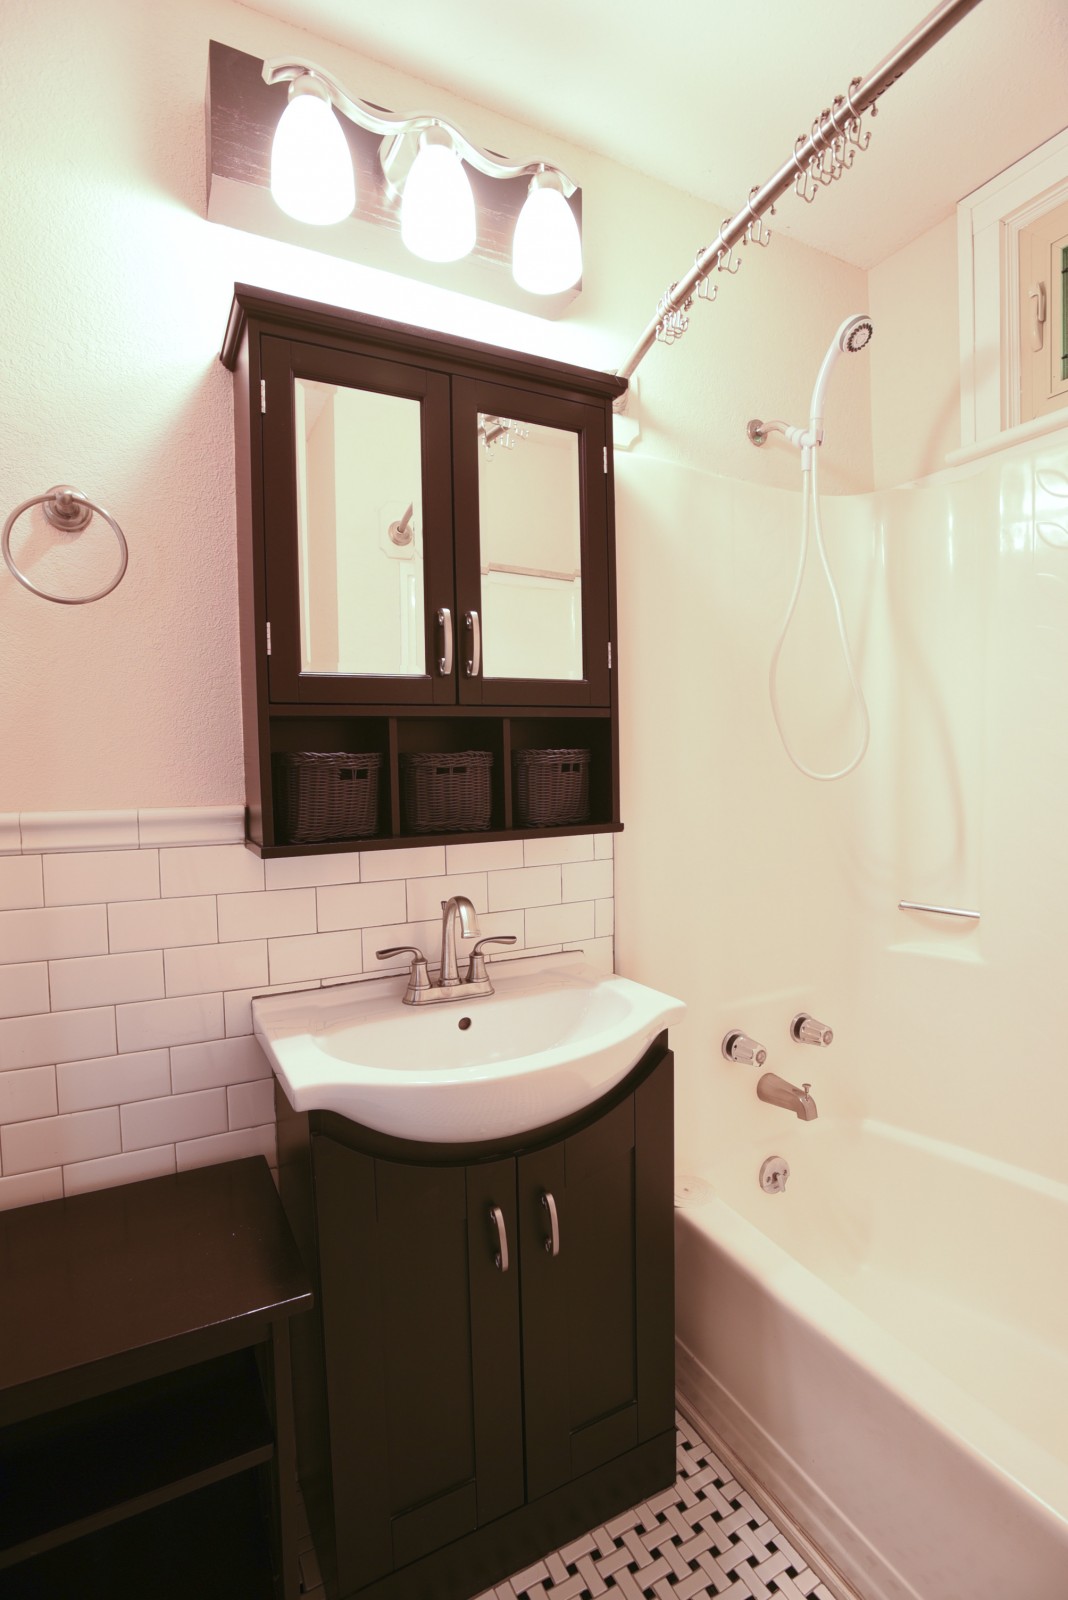 Sink and shower in bathroom